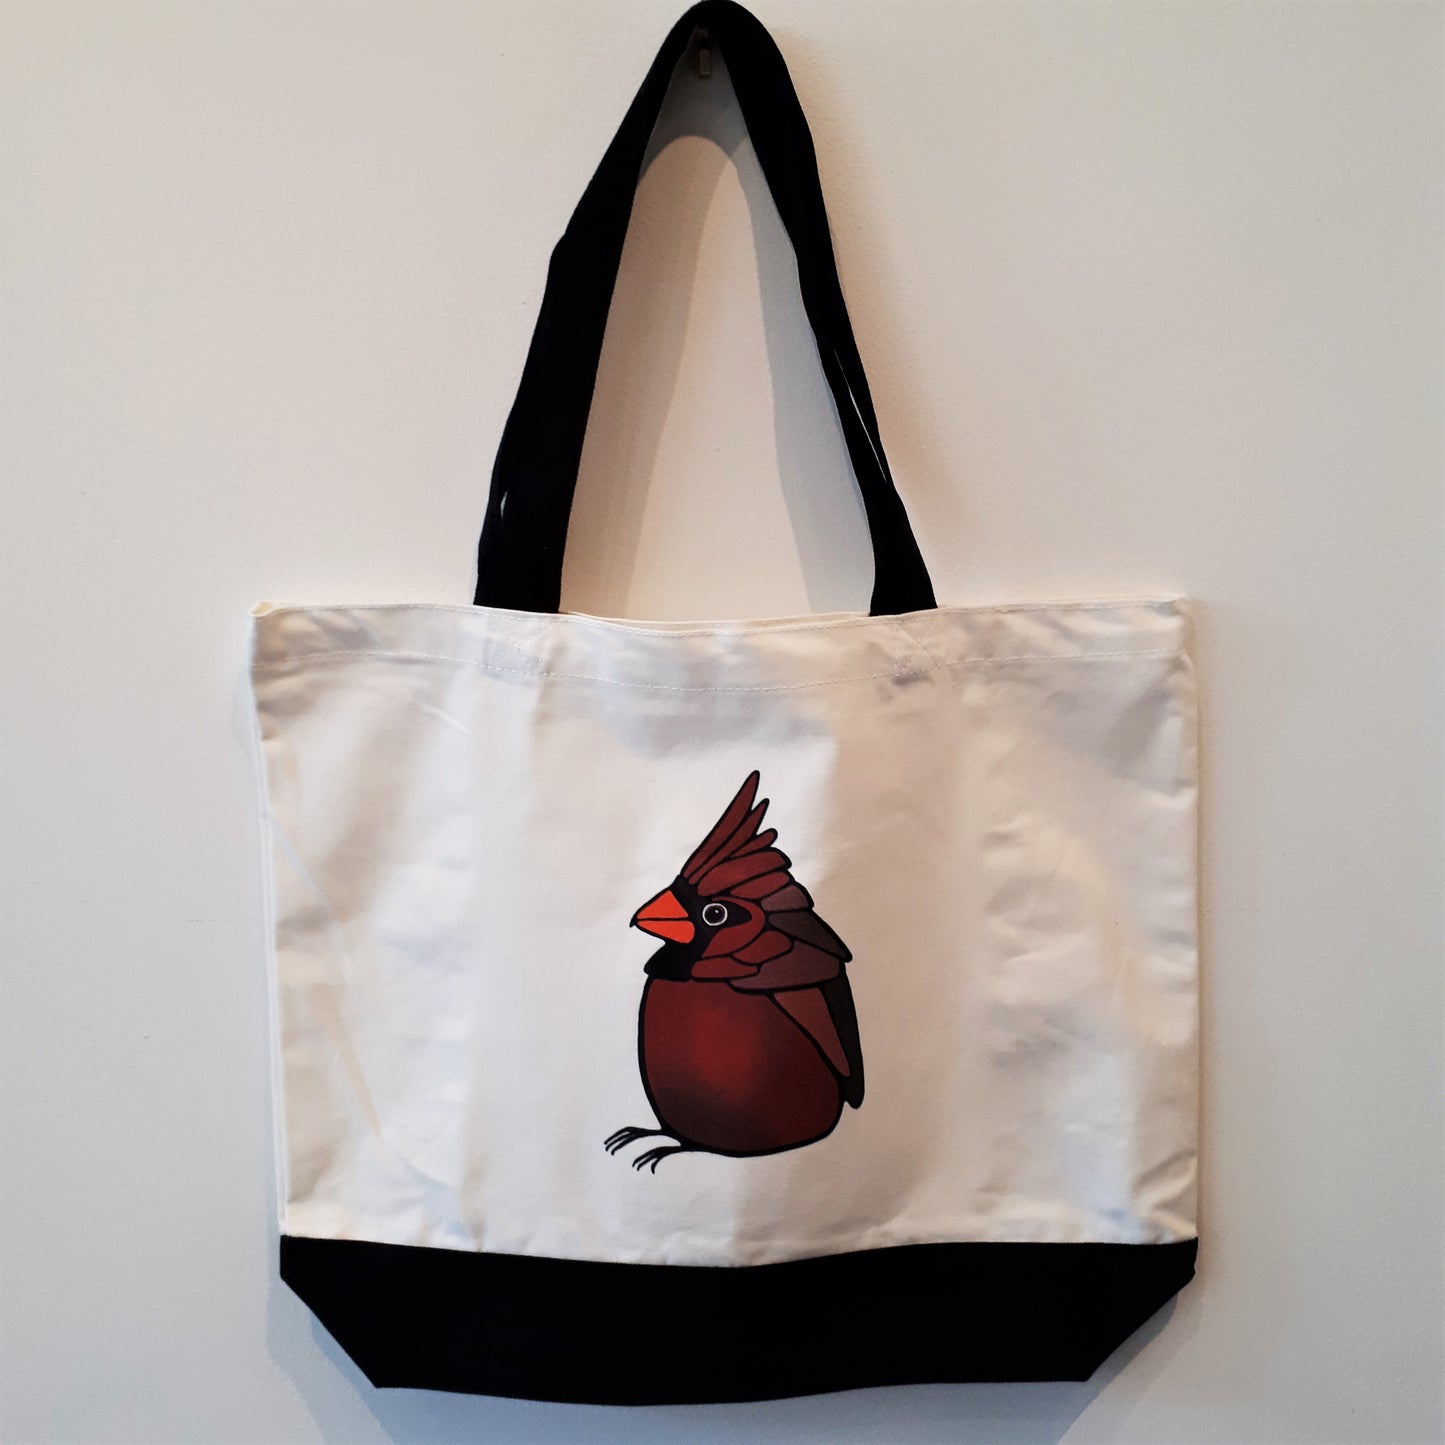 100% Cotton Canvas Tote Bag - Kingfisher or Cardinal or Downy Woodpecker